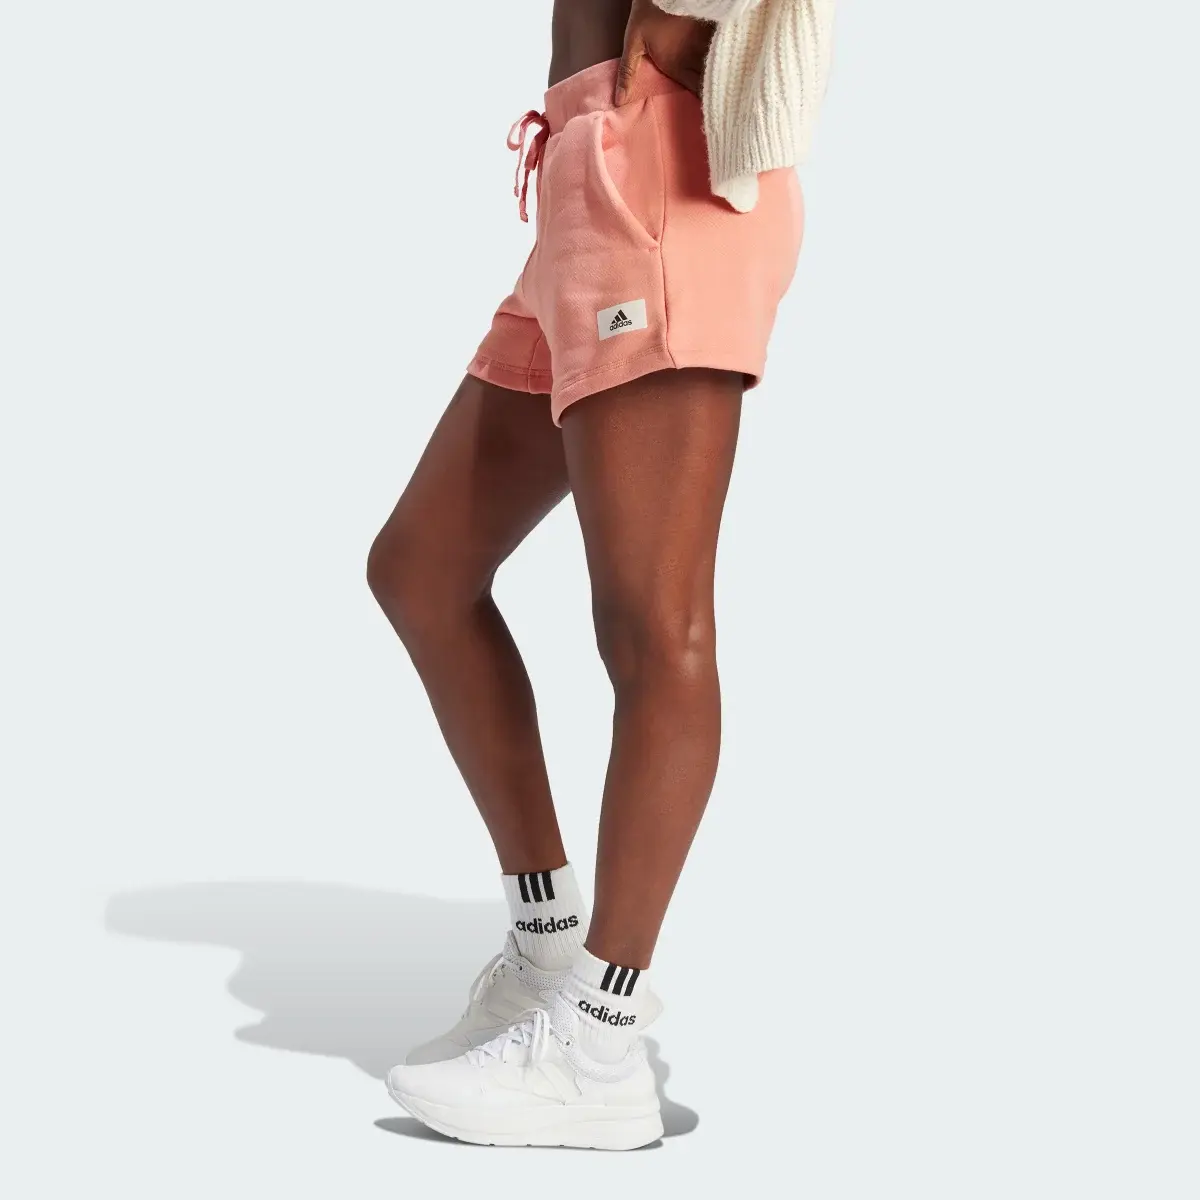 Adidas Lounge French Terry Shorts. 2